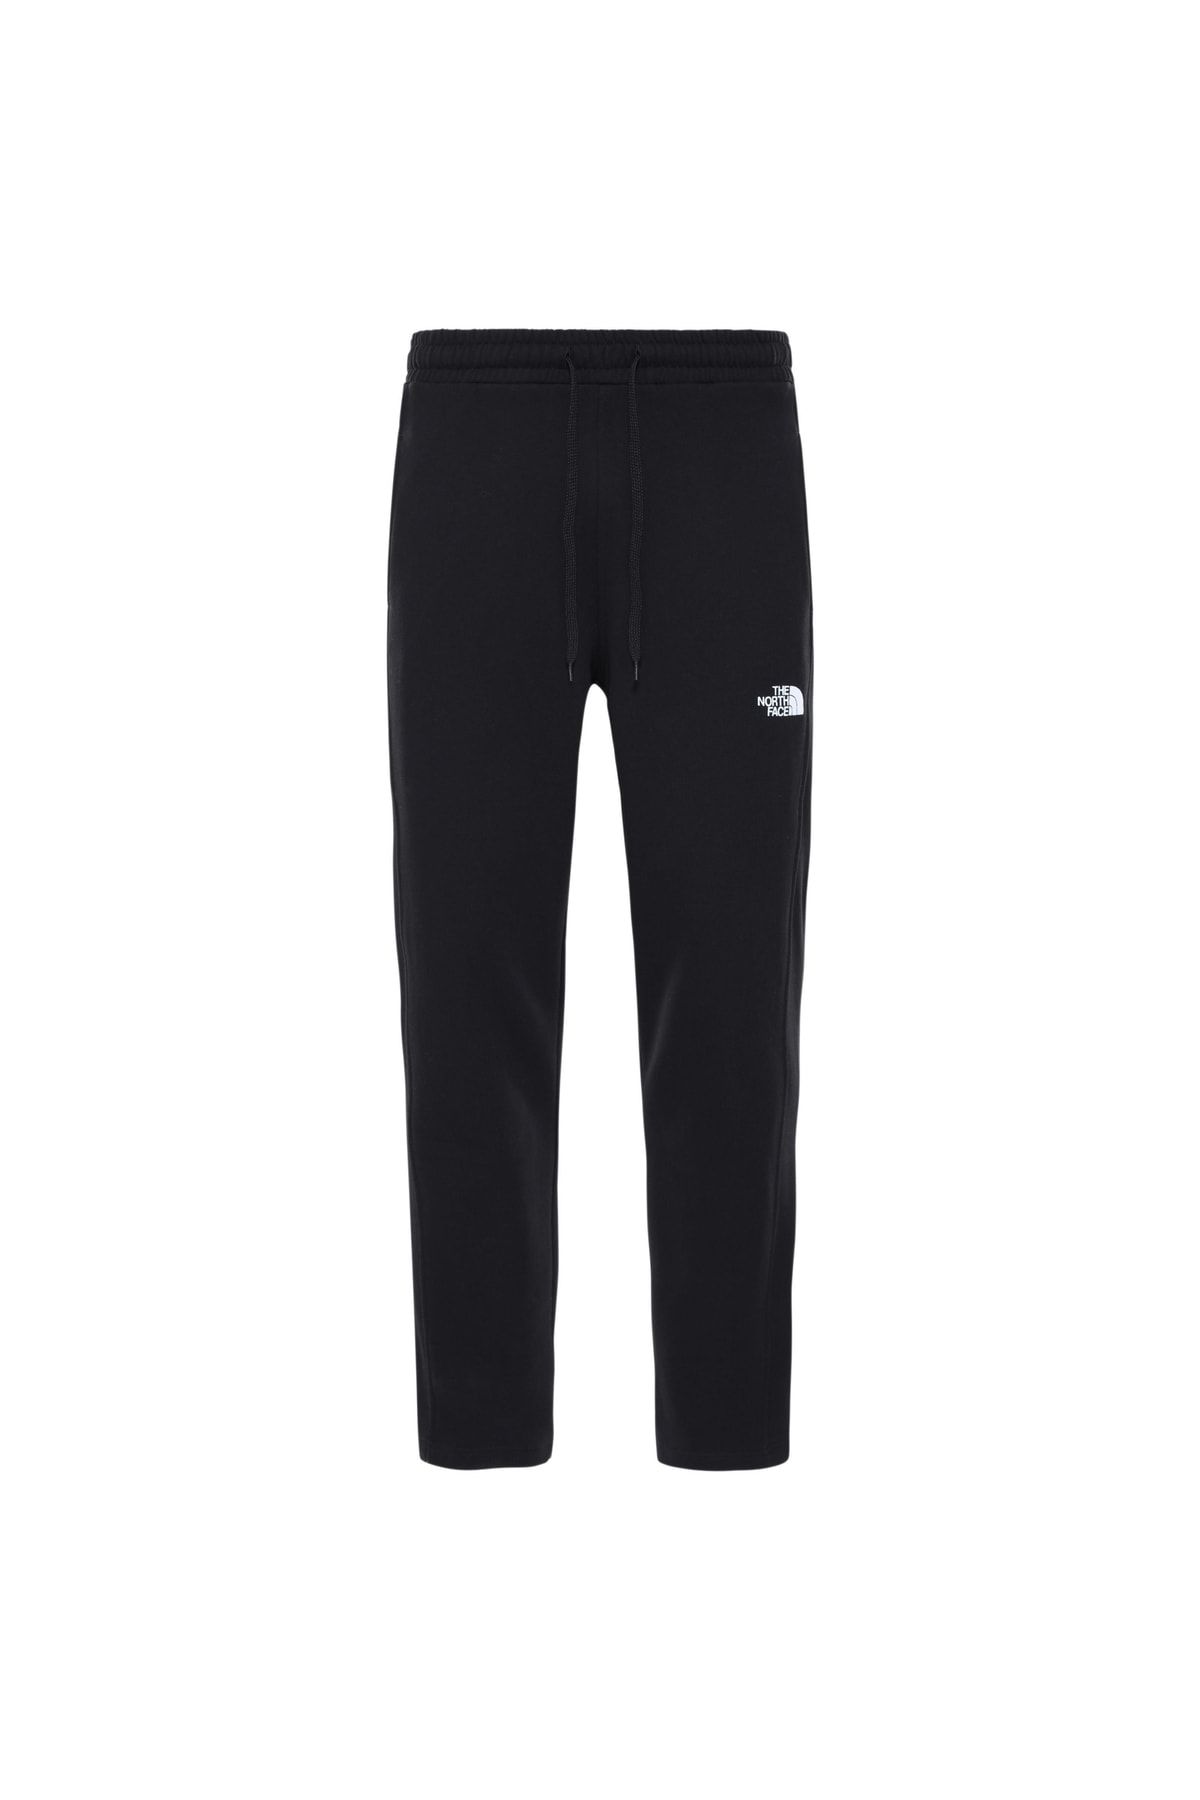 The North Face The Forth Face M Standard Pant - Eu - Nf0a4m7ljk31